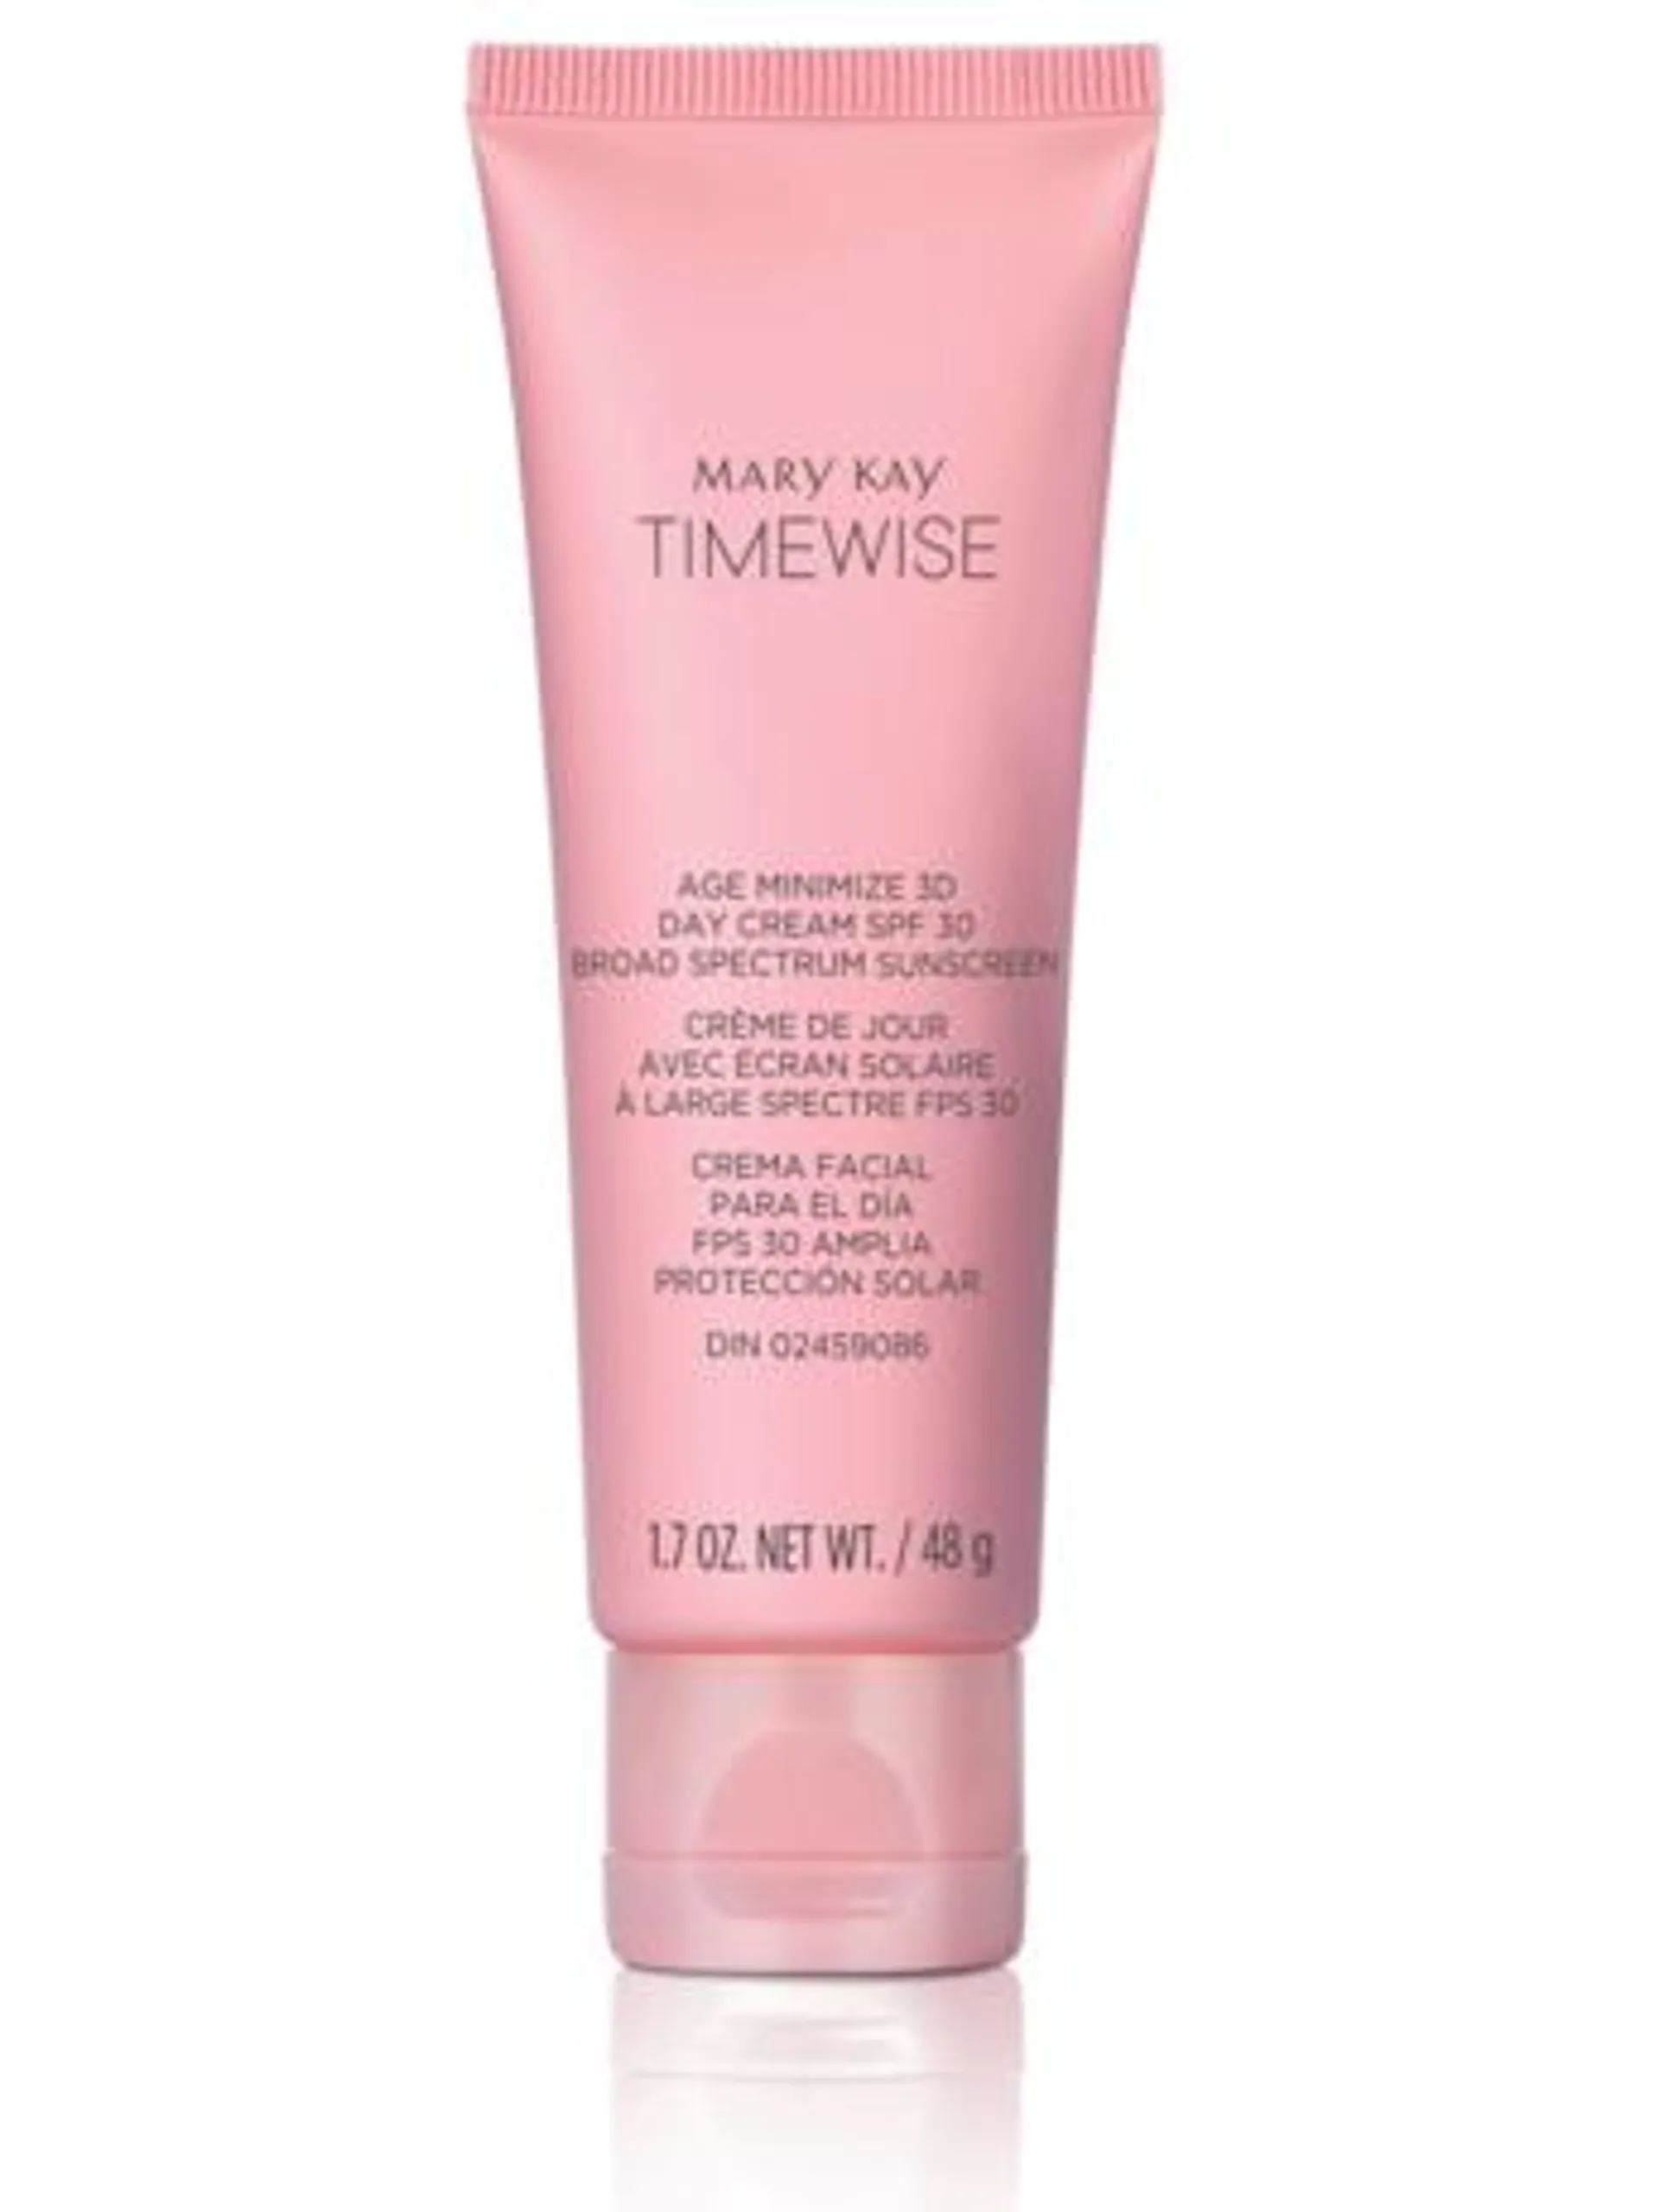 TimeWise® Age Minimize 3D® Day Cream SPF 30 Broad Spectrum Sunscreen - Combination/Oily